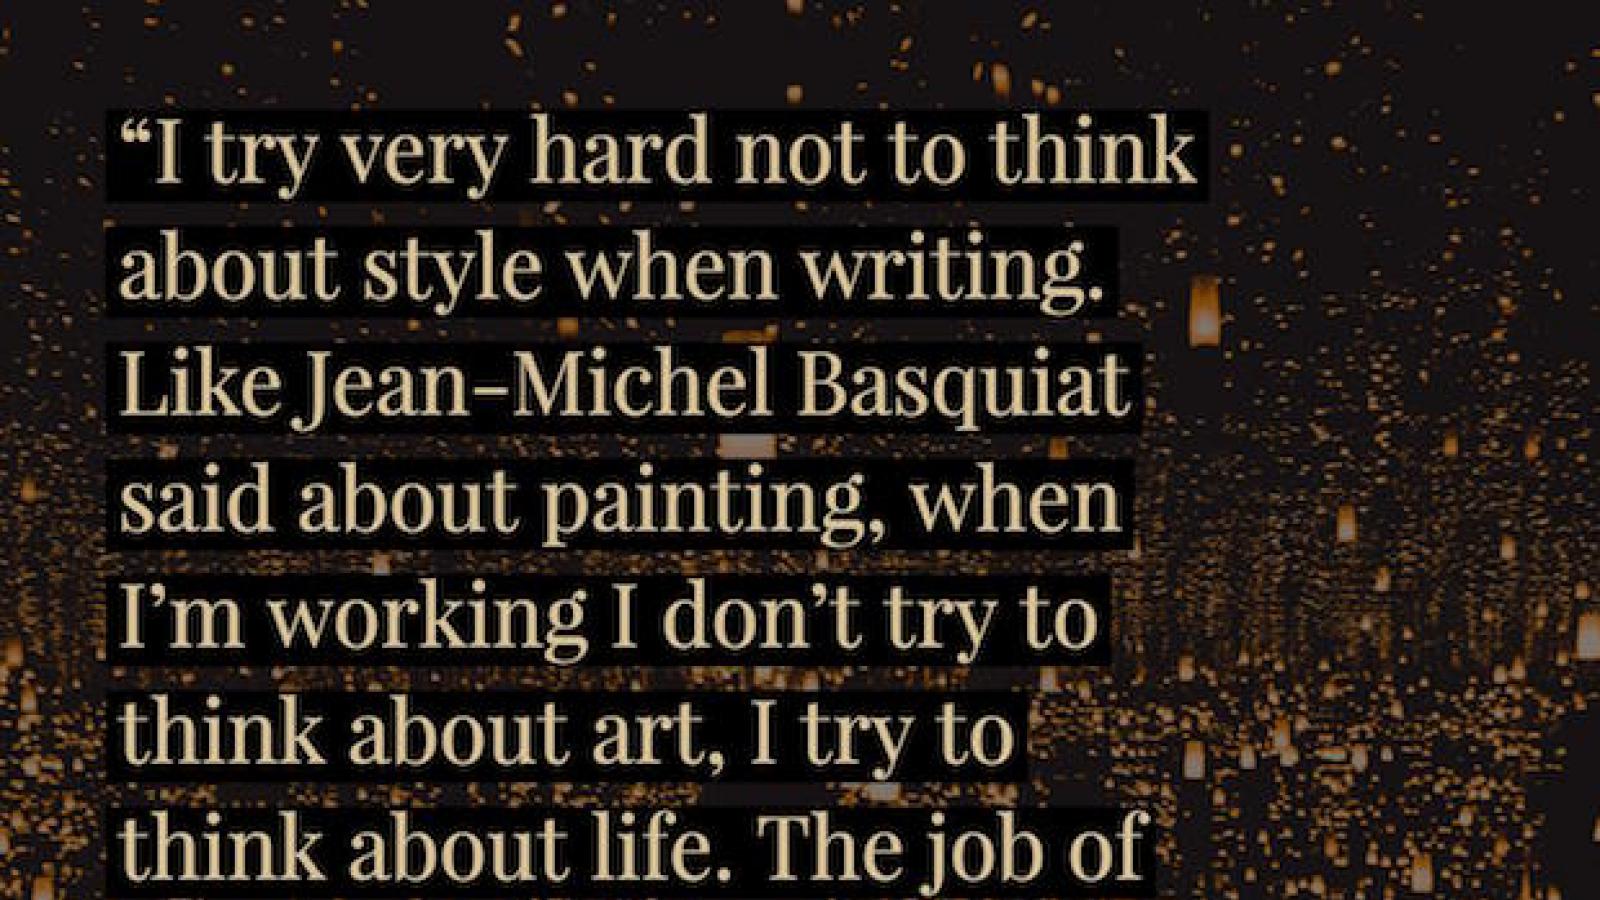 I try very hard not to think about style when writing. Like Jean-Michel Basquiat said about painting, when I’m working I don’t try to think about art, I try to think about life. The job of the poem is to bridge the two